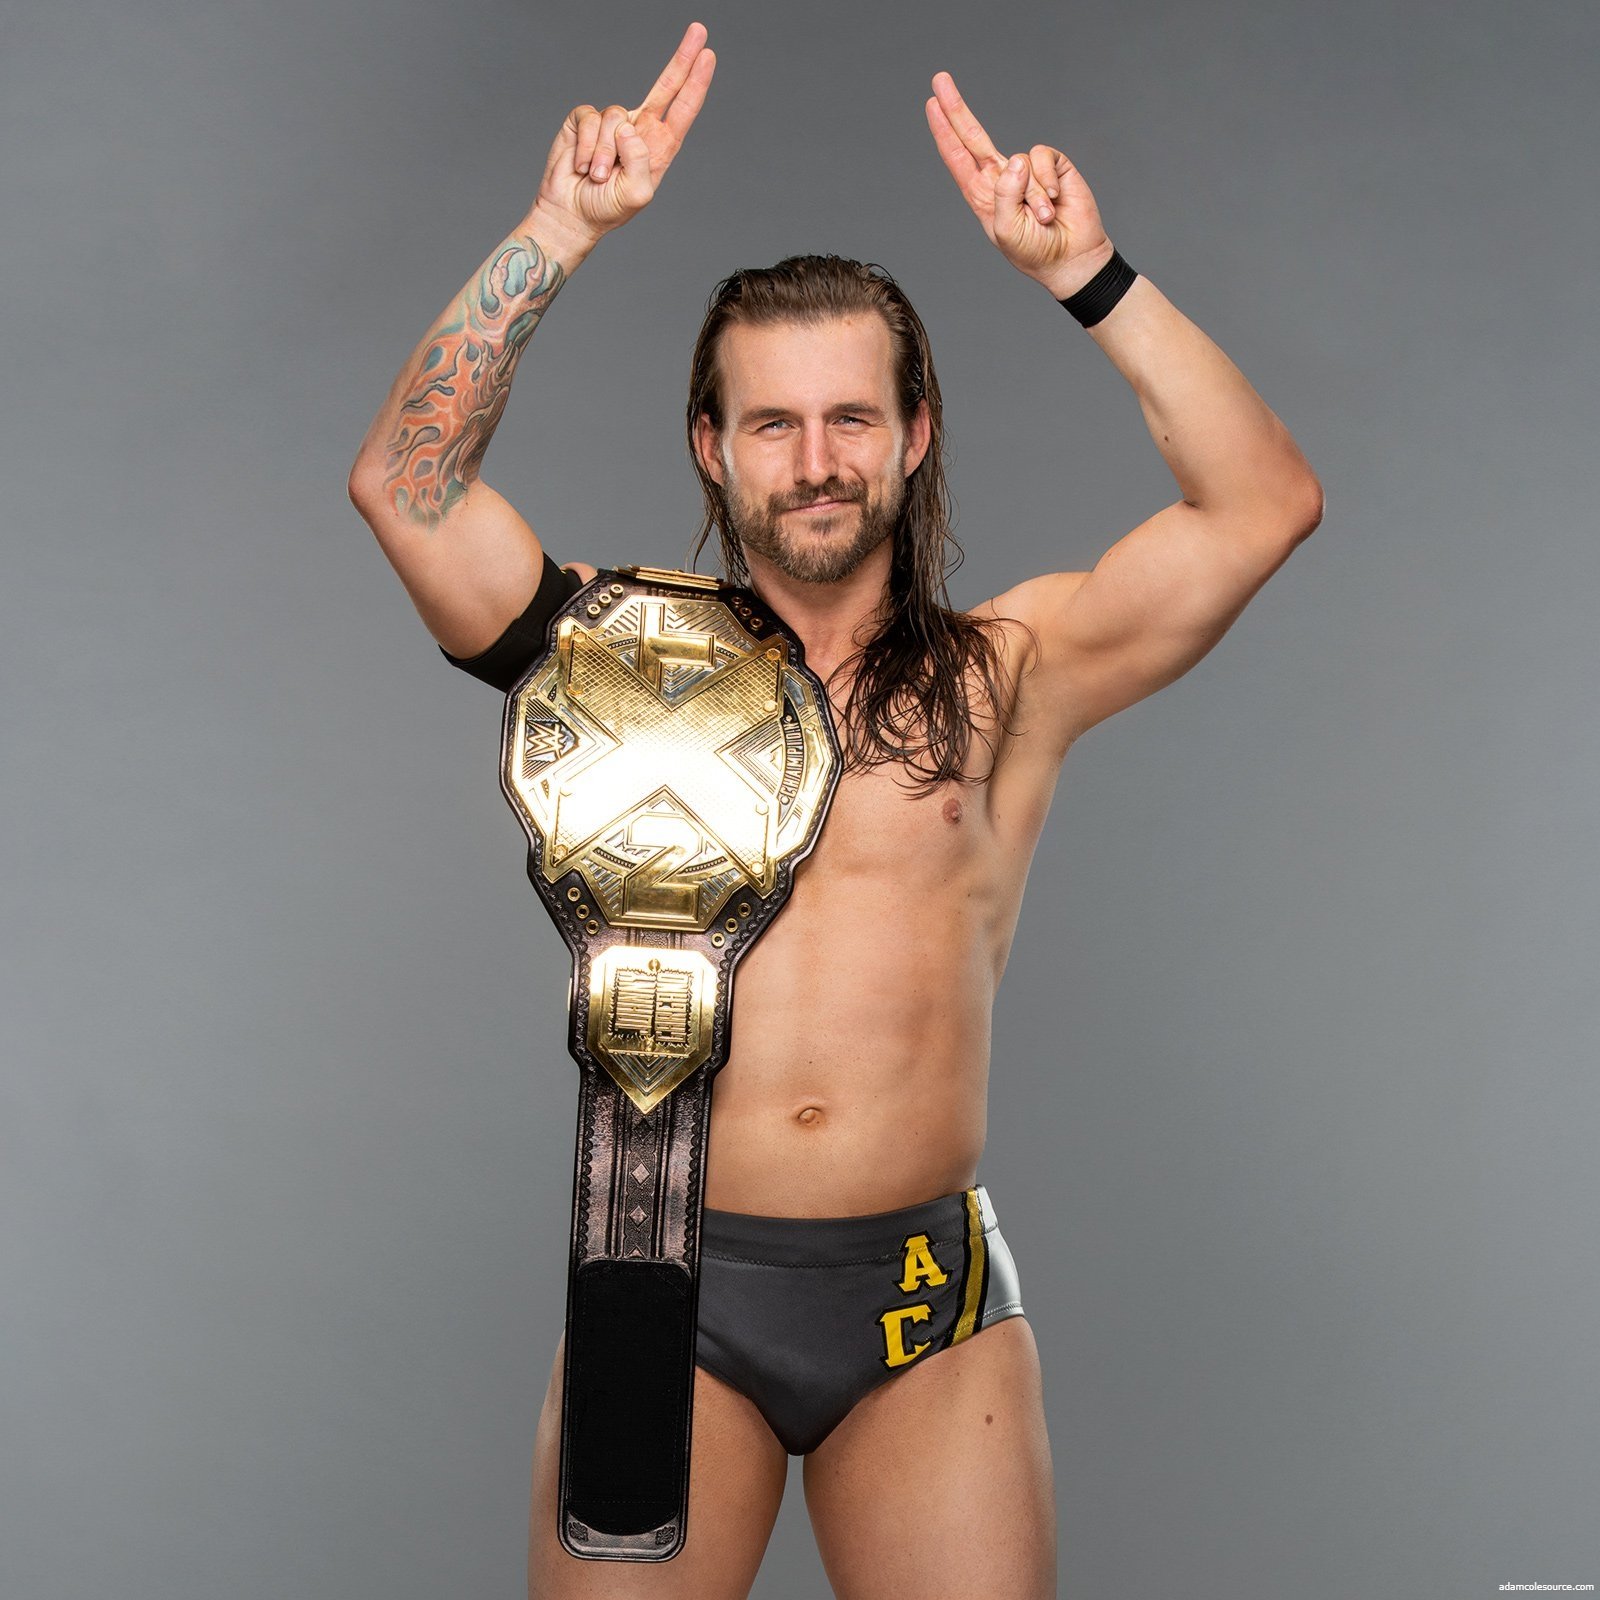 Adam Cole Source | Adam Cole Fansite en Twitter: "2 Years ago today Made his NXT debut and from that day on he has proved he is the best NXT